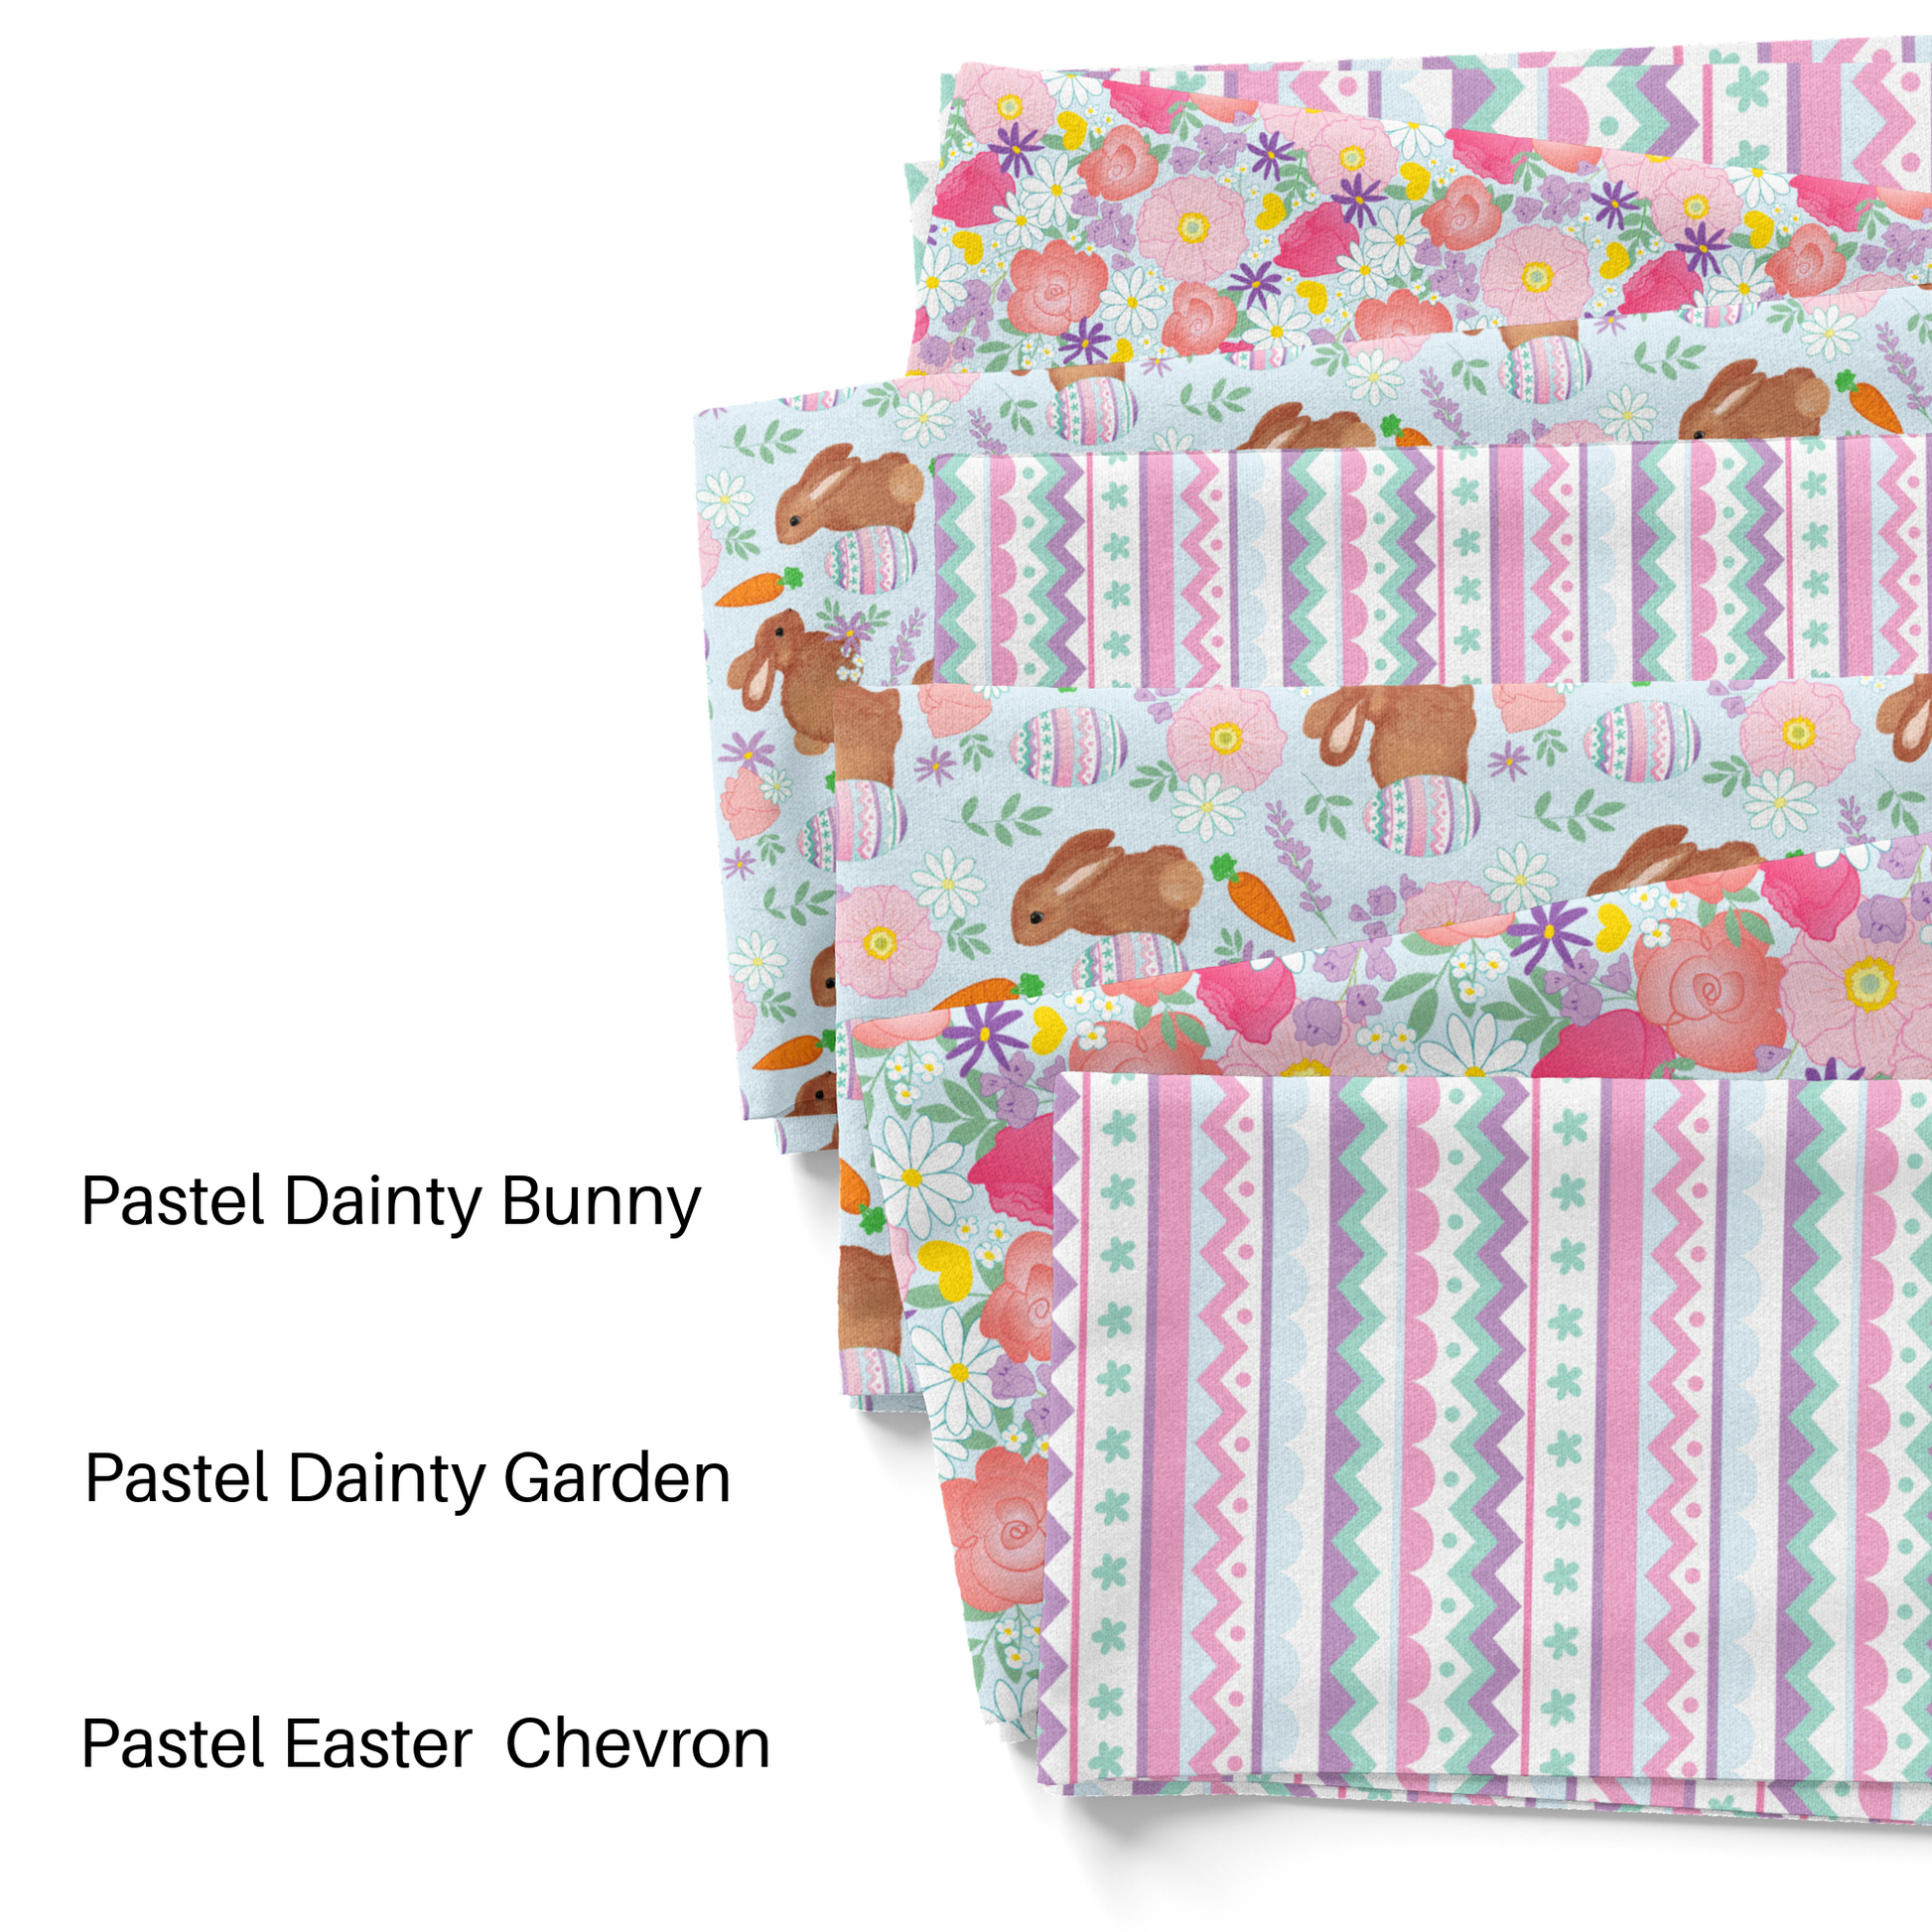 Pip Supply Pastel Easter fabric by the yard swatches.